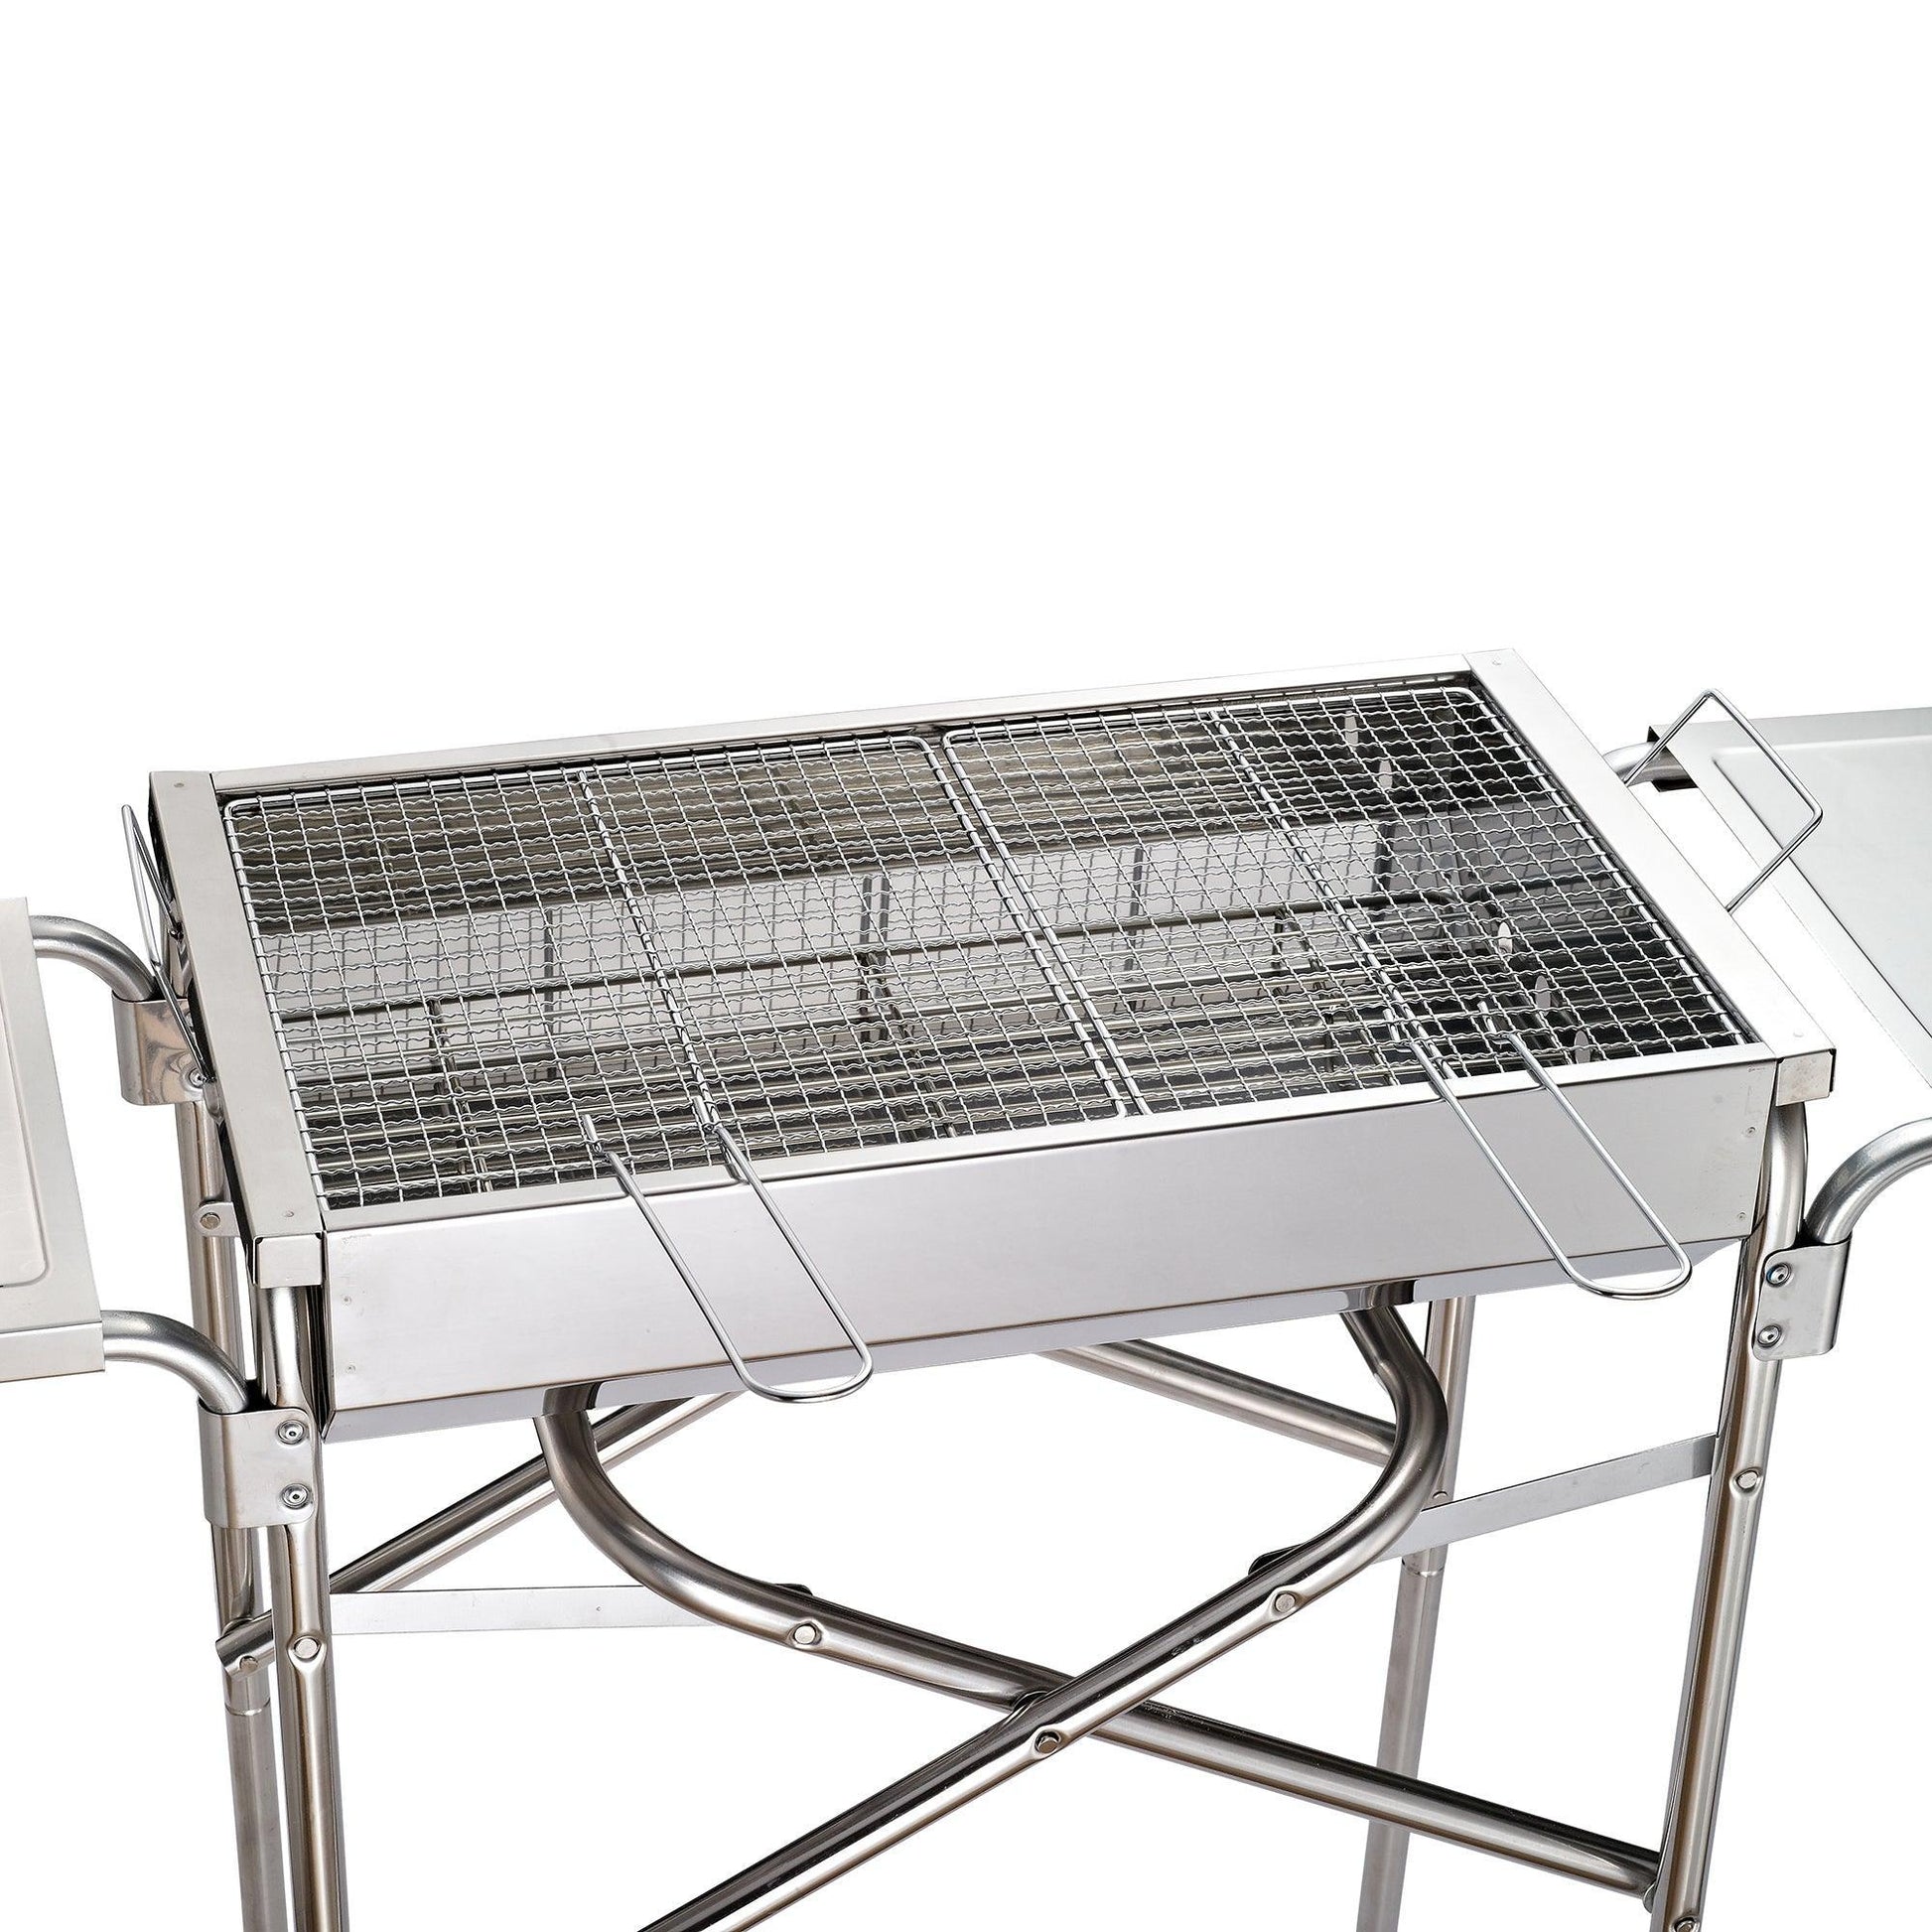 Outsunny Folding Barbecue Grill with Adjustable Legs in Silver - ALL4U RETAILER LTD